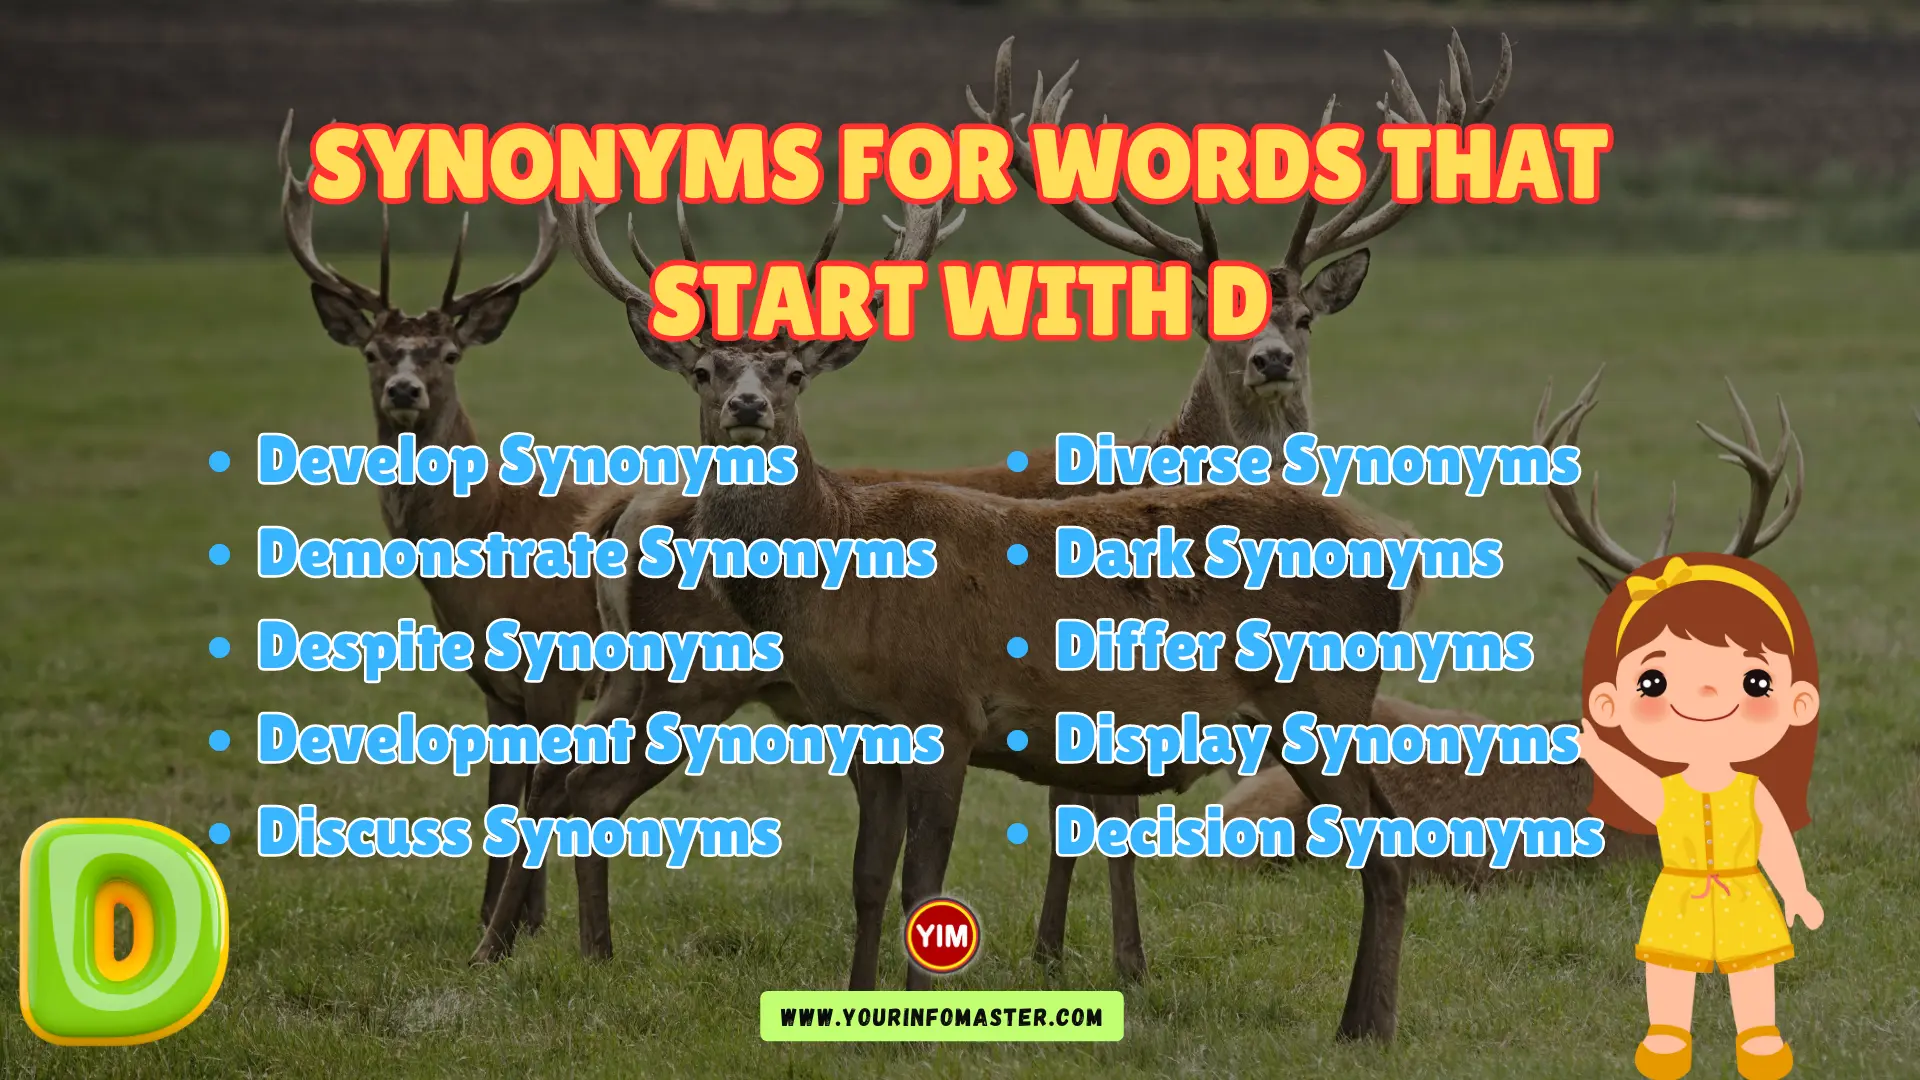 Synonyms for Words that start with D